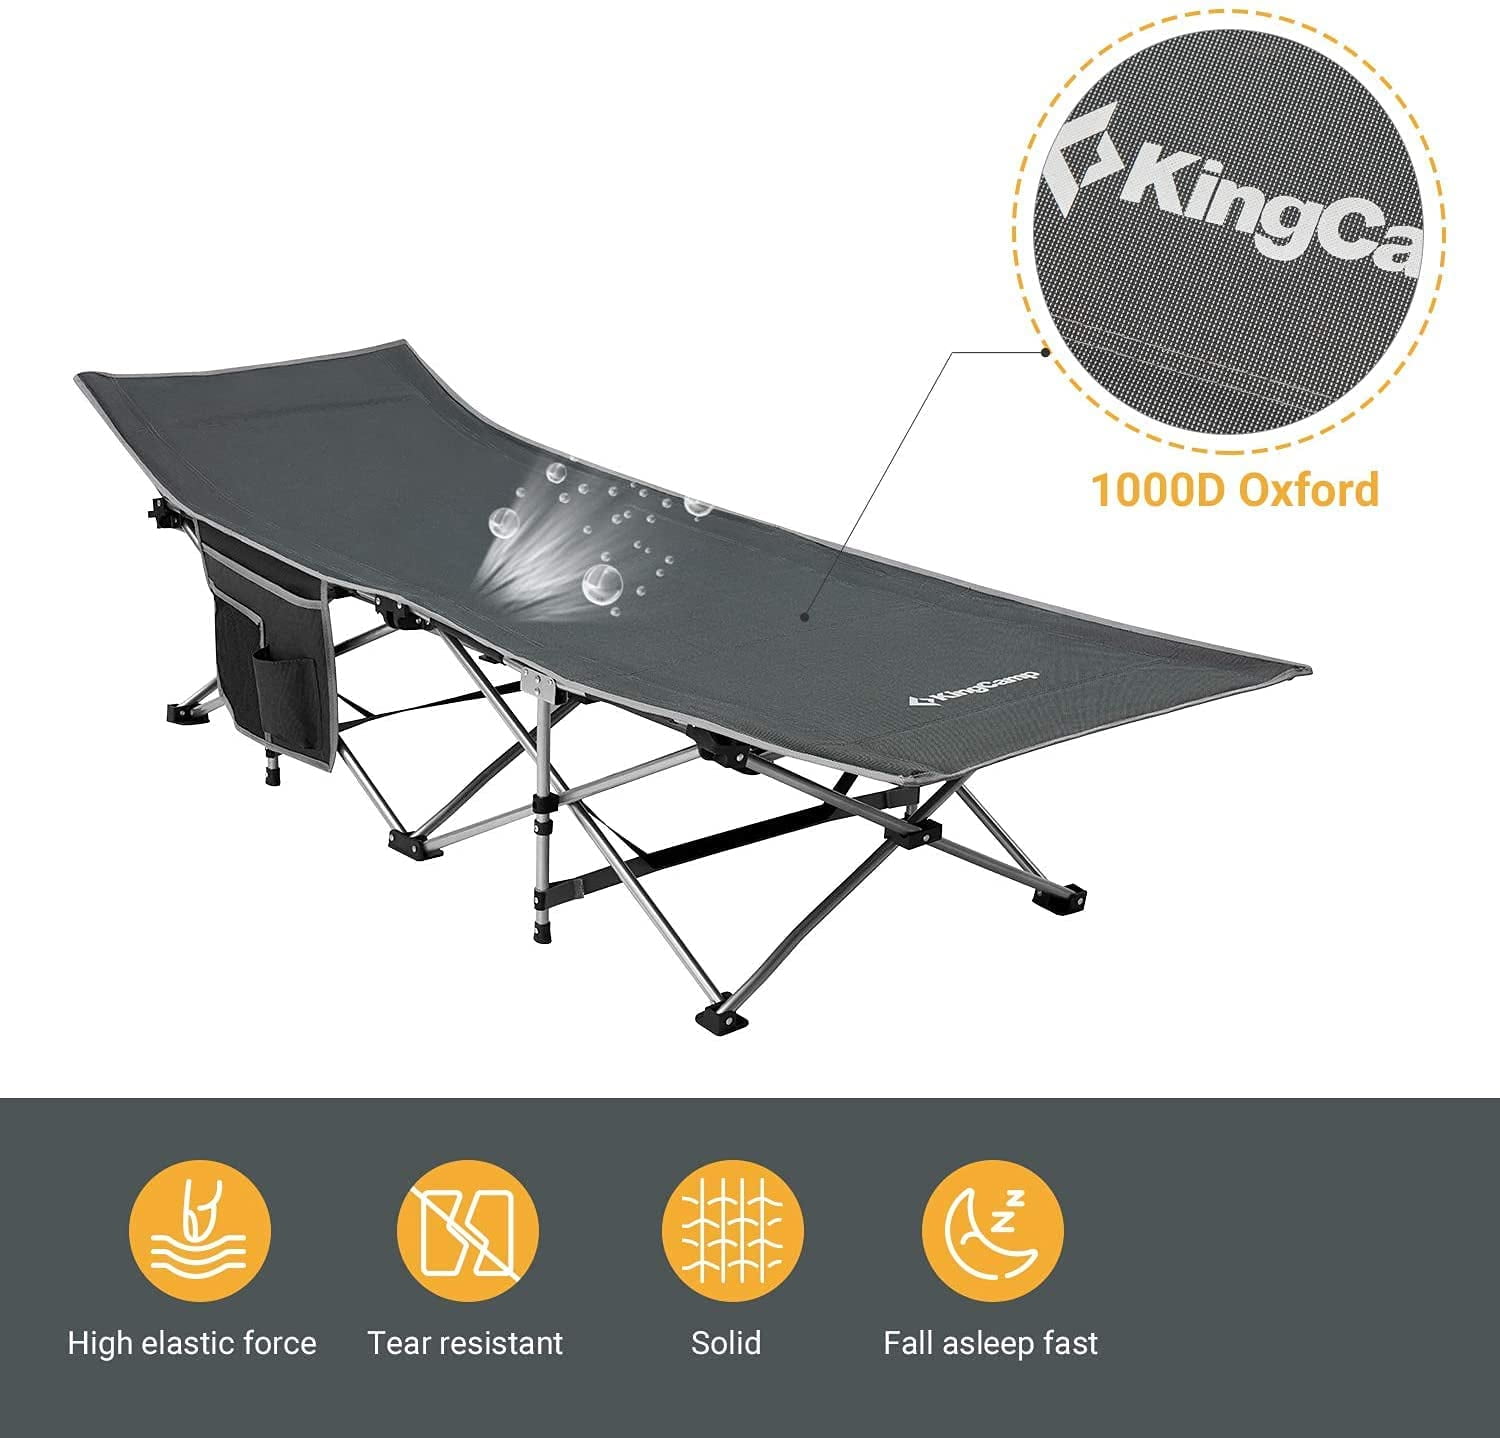 KingCamp Portable Folding Camping Cot Lightweight Sleeping Cot for